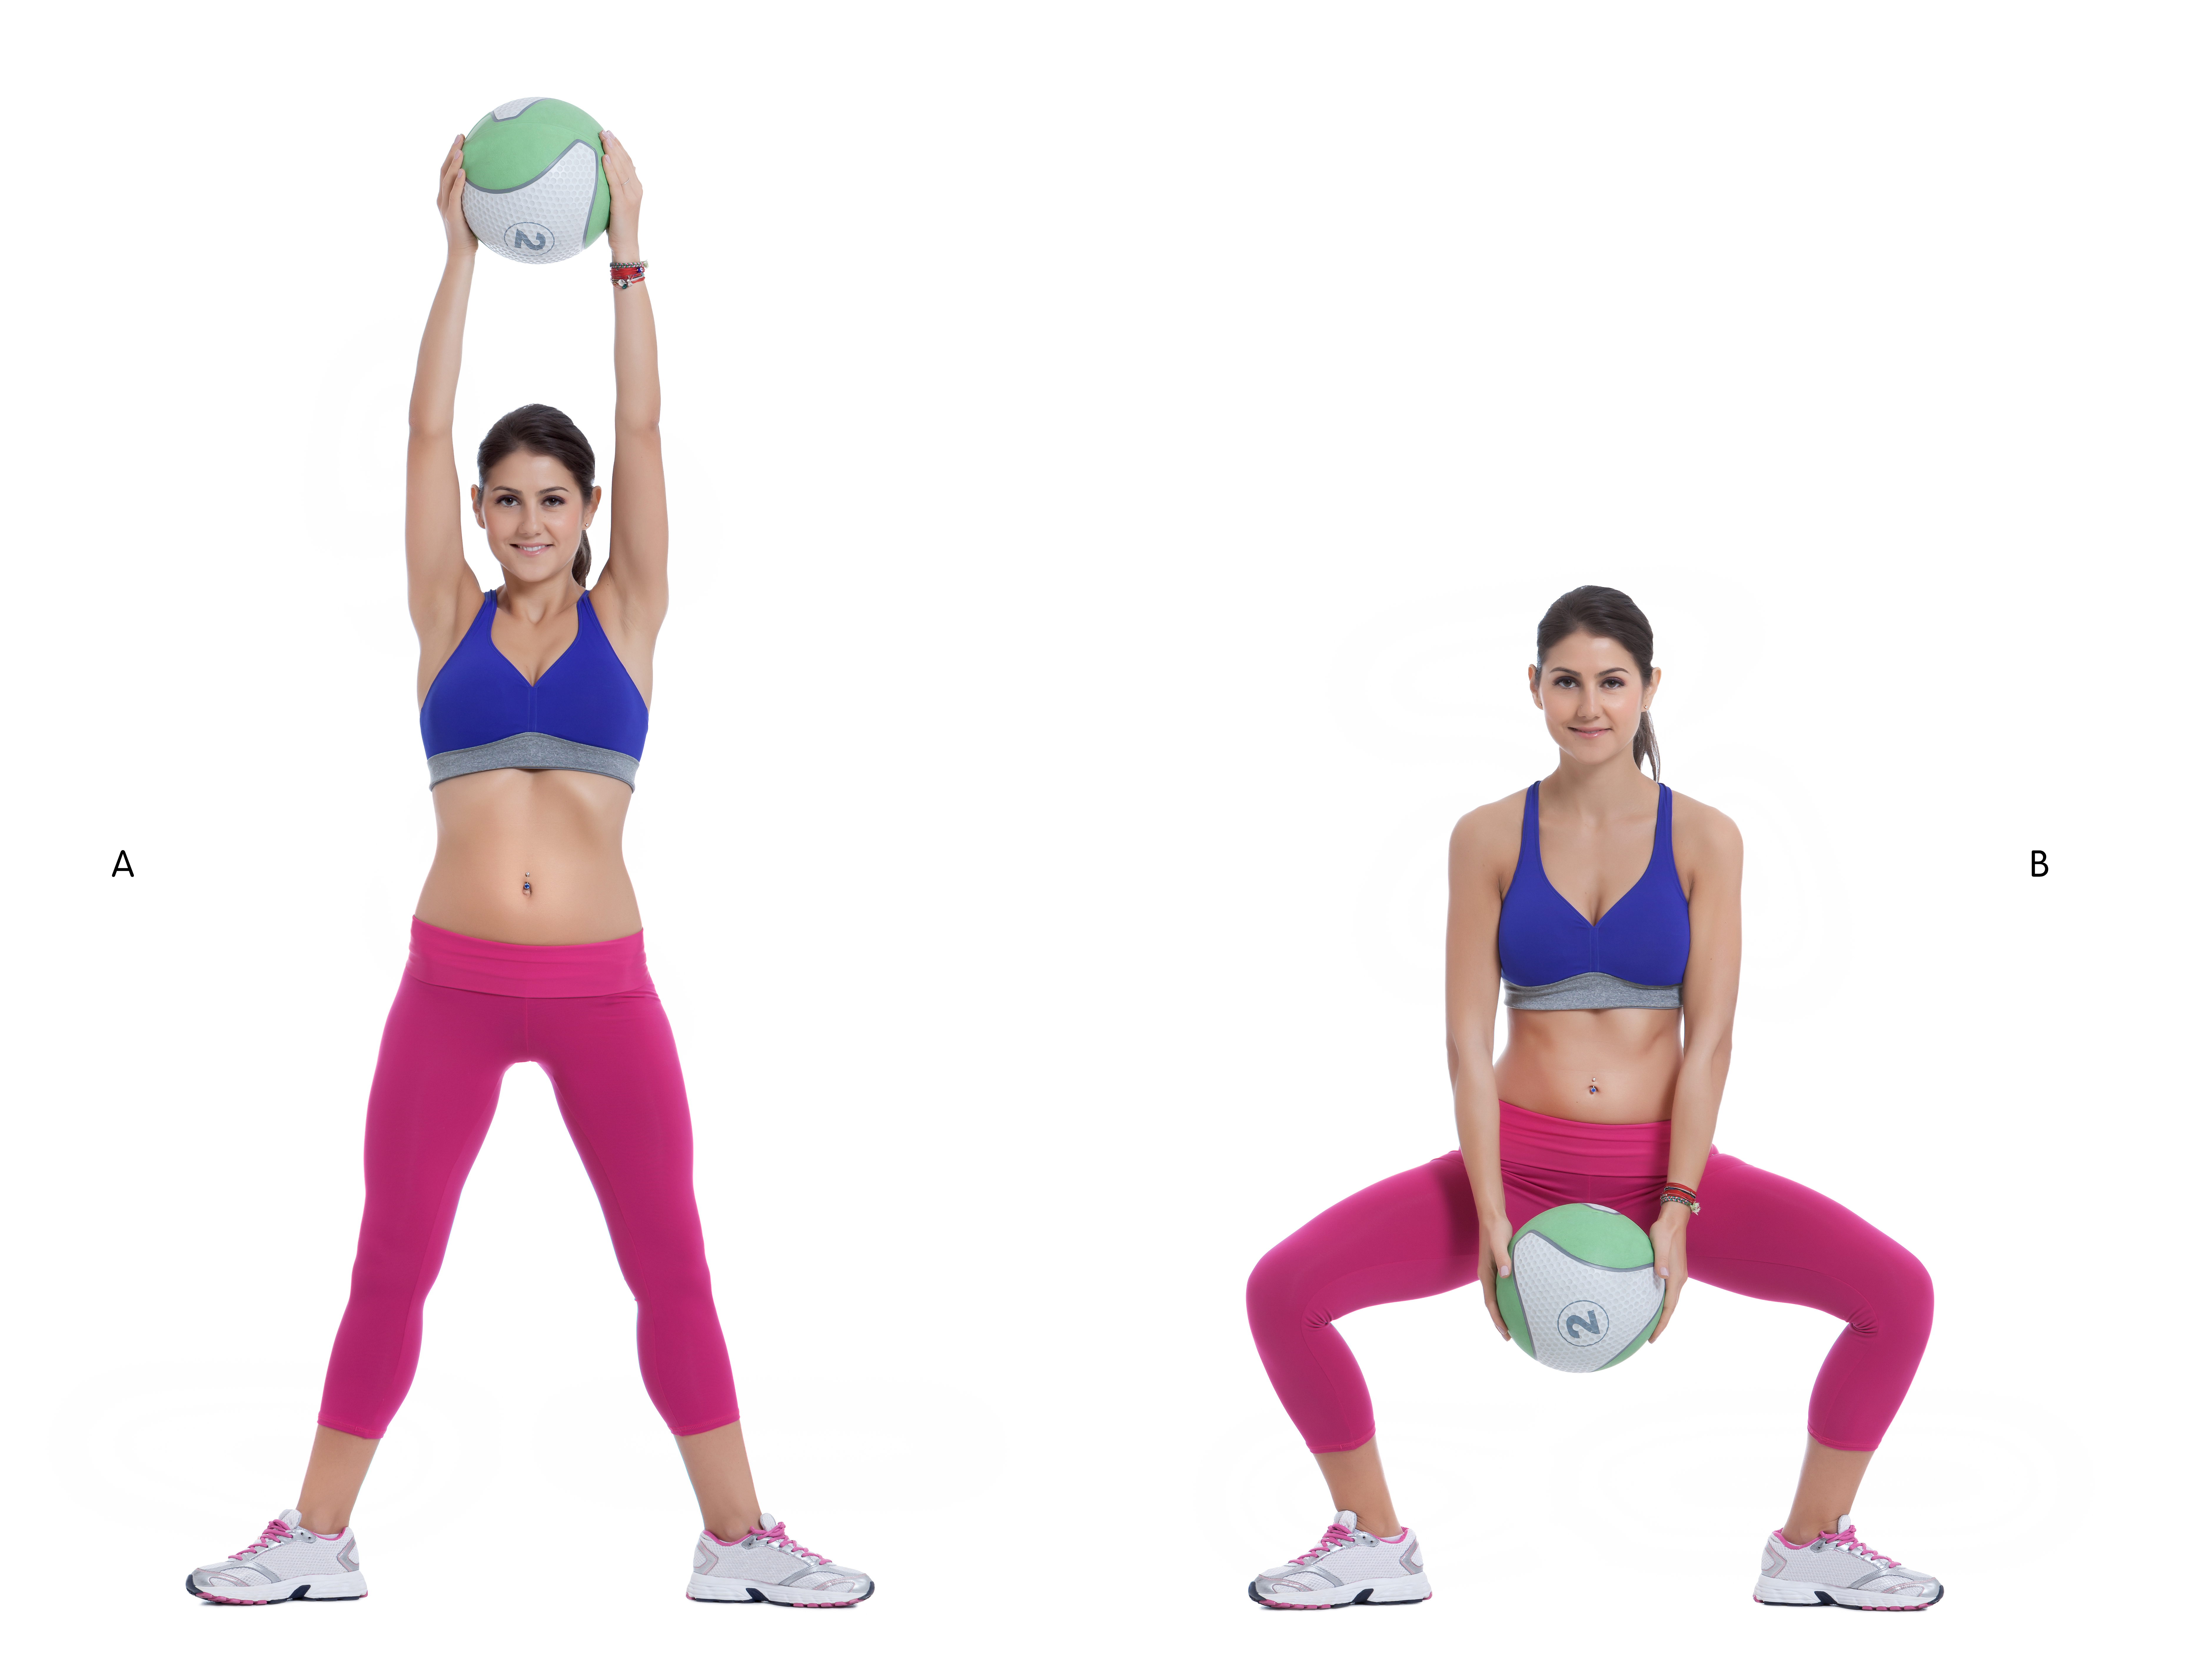 Step by step instructions: Stand with your feet wide holding a light medicine ball in front of you in both hands. (A) Squat down moving your rear back and keeping your knees over your ankles and lower the medicine ball to the floor keeping your head up an